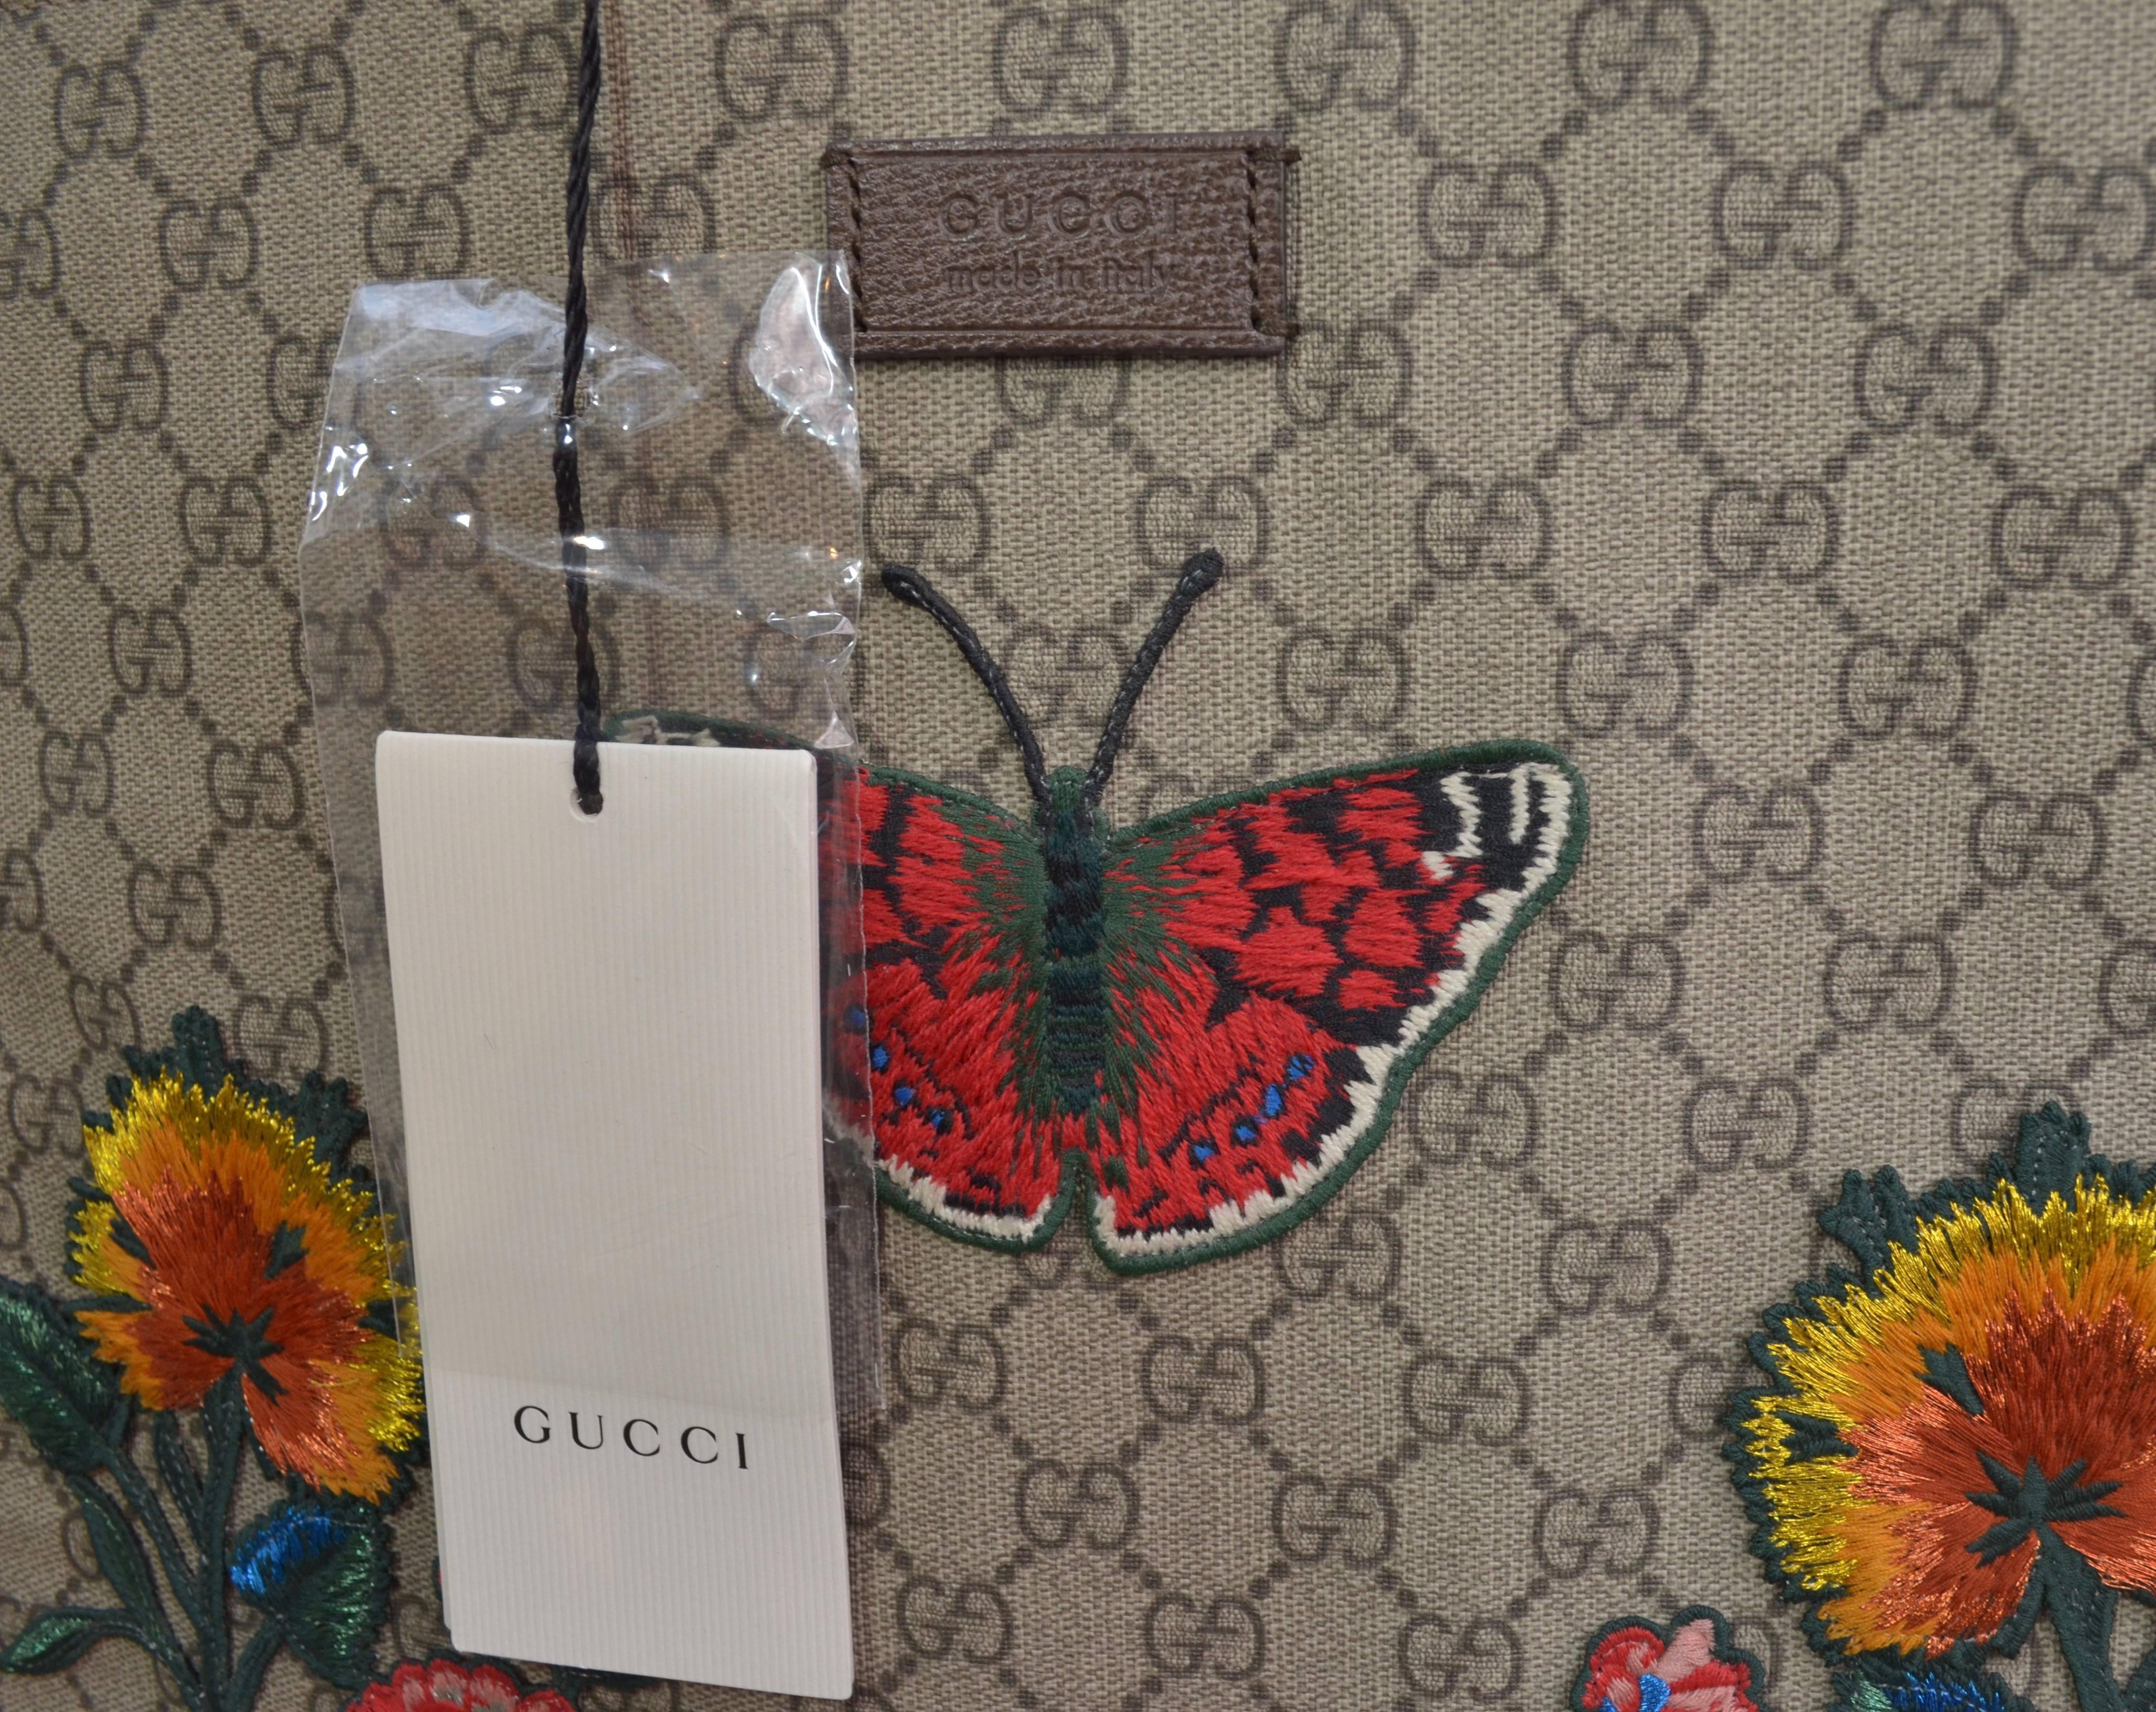 Gucci Supreme Embroidered Butterfly Tote 2016/7 1